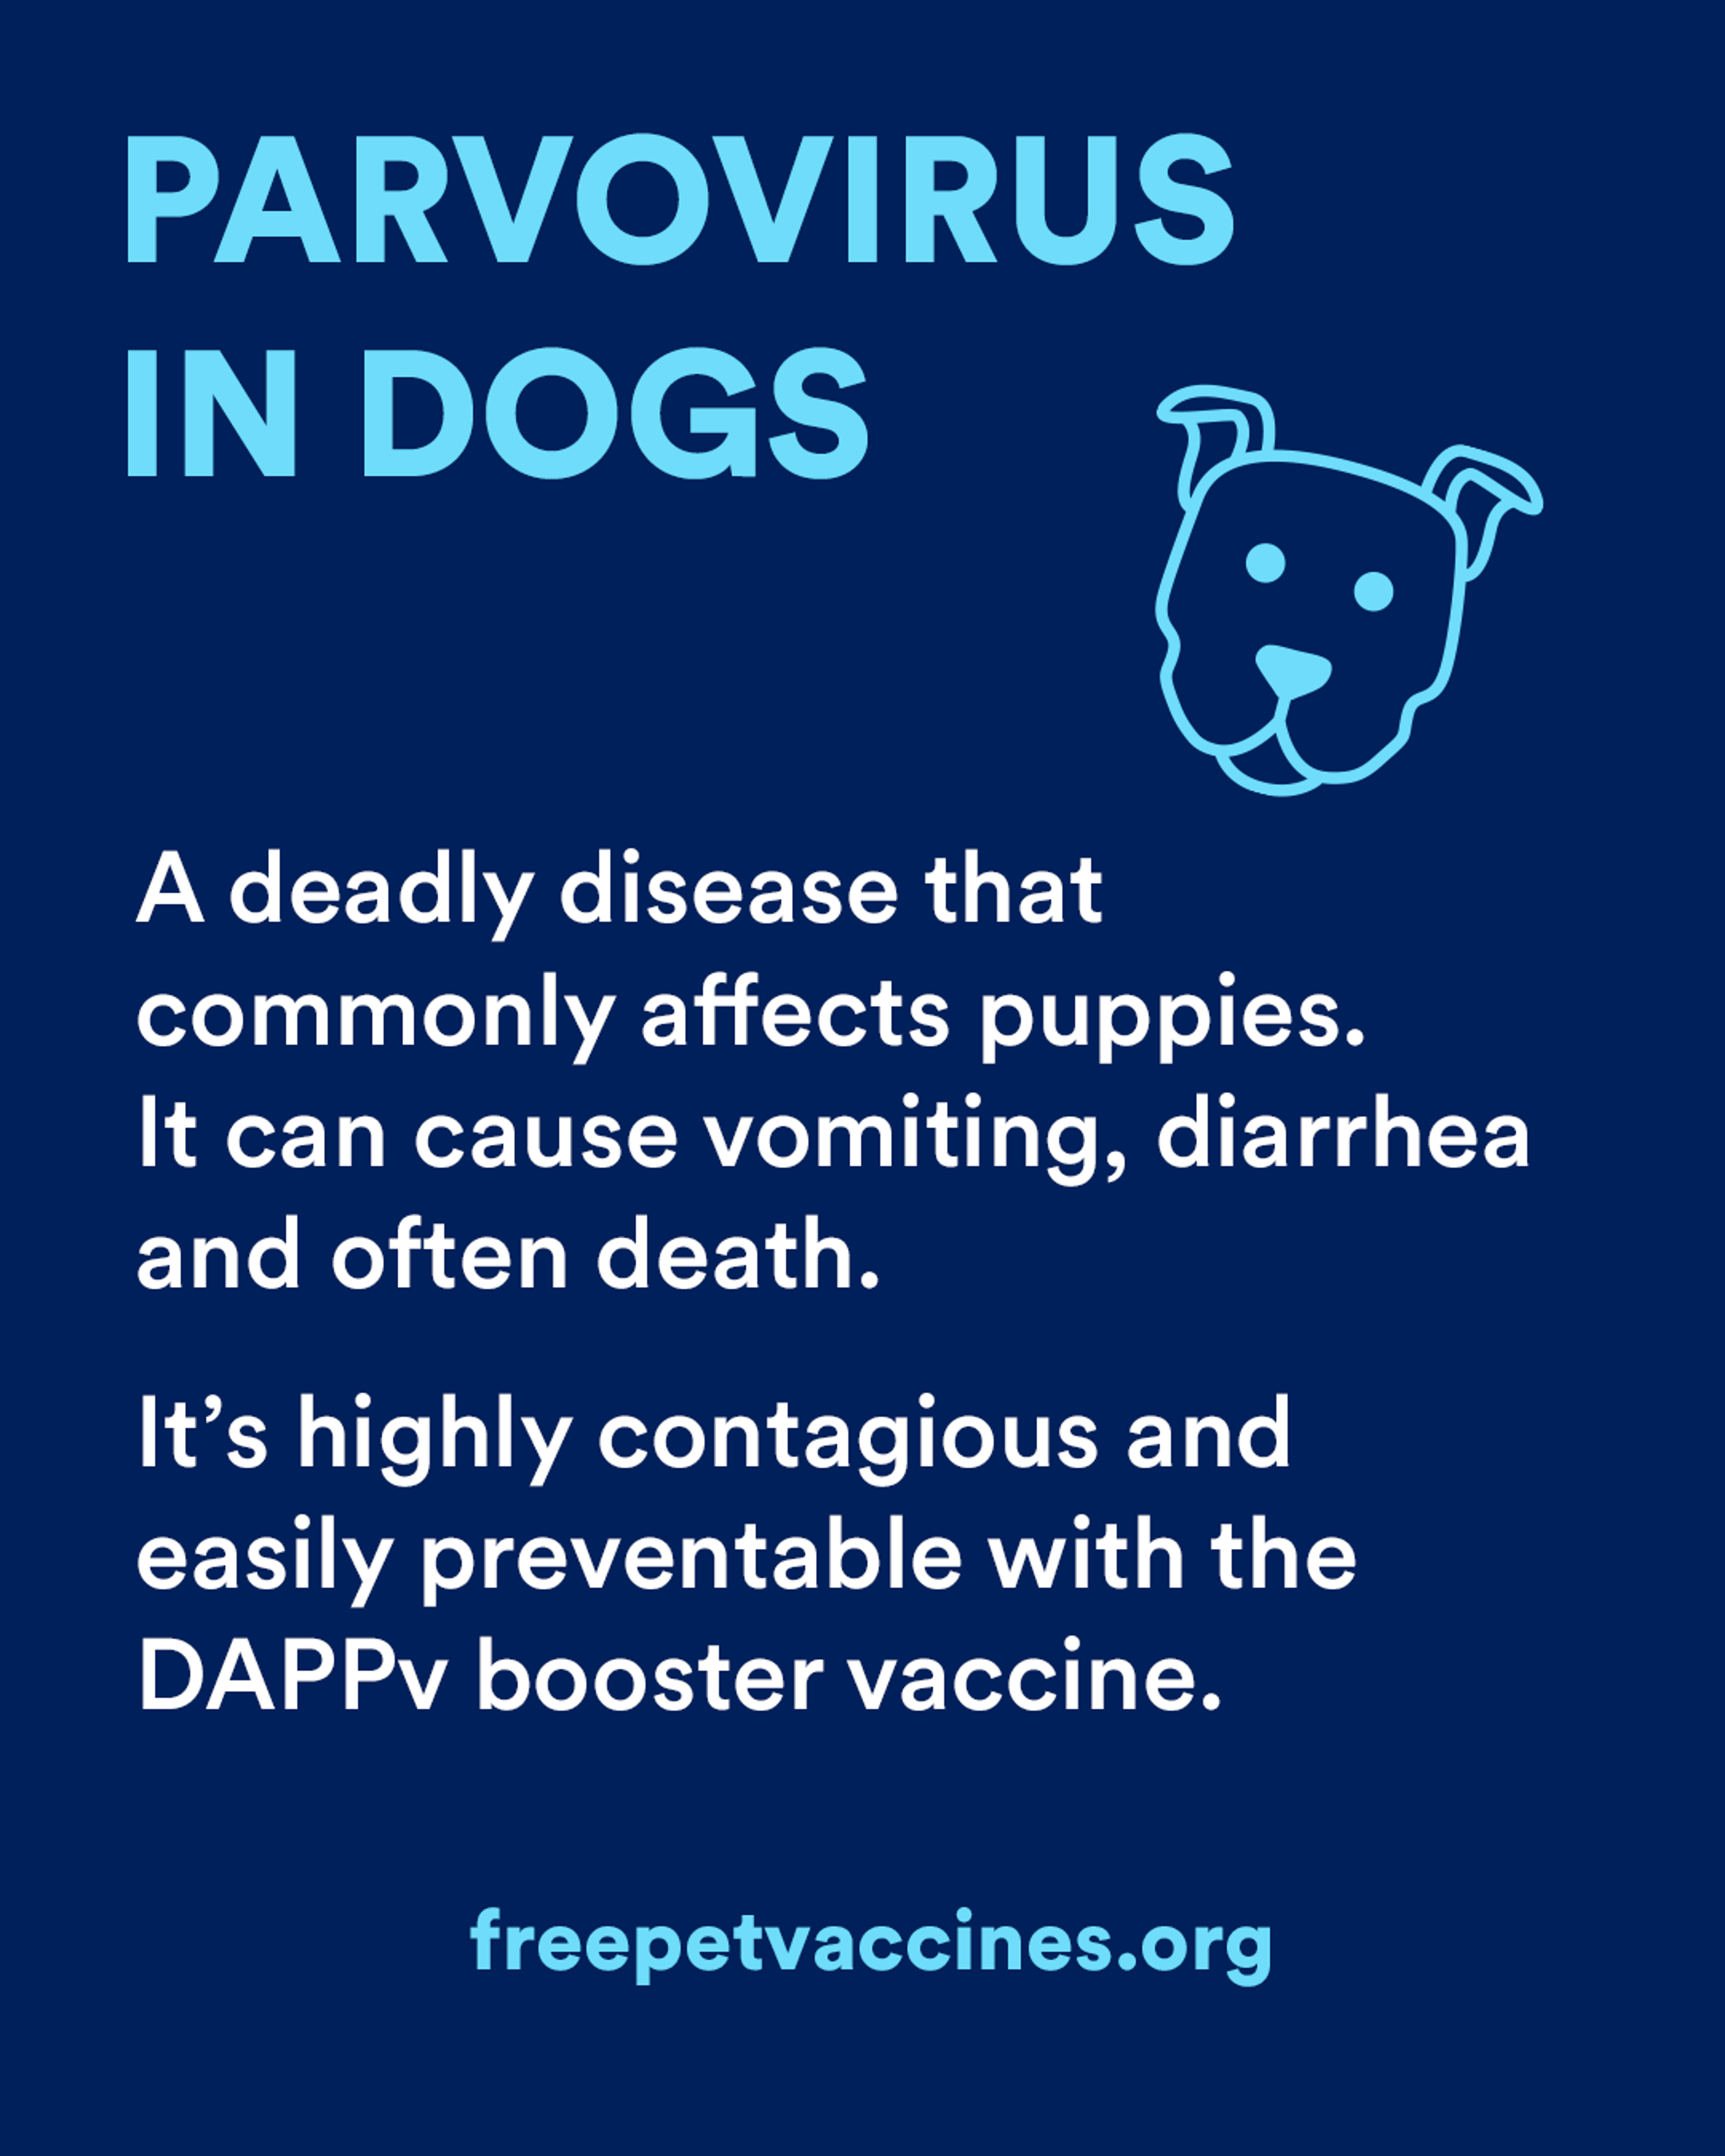 Parvovirus in Dogs - A deadly disease that commonly affects puppies. It can cause vomiting, diarrhea, and often death. It's highly contagious and easily preventable with the DAPPv booster vaccine. 